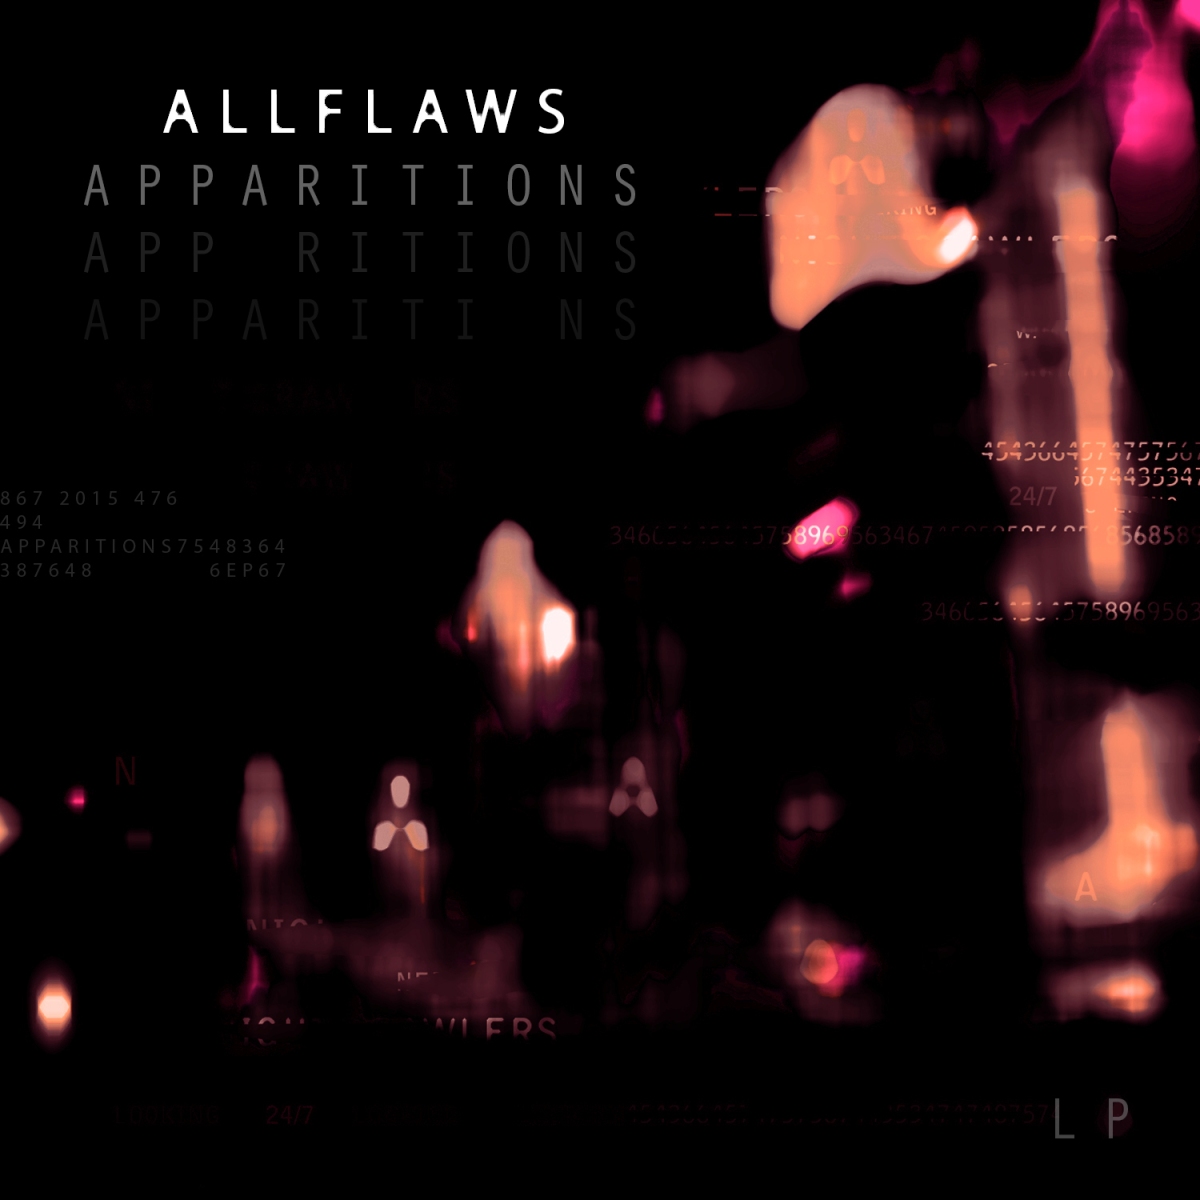 “ALLFLAWS ‘Apparitions’ – A Deep and Haunting Trip Hop Album with Industrial Hip Hop and Dark Electro Influences”